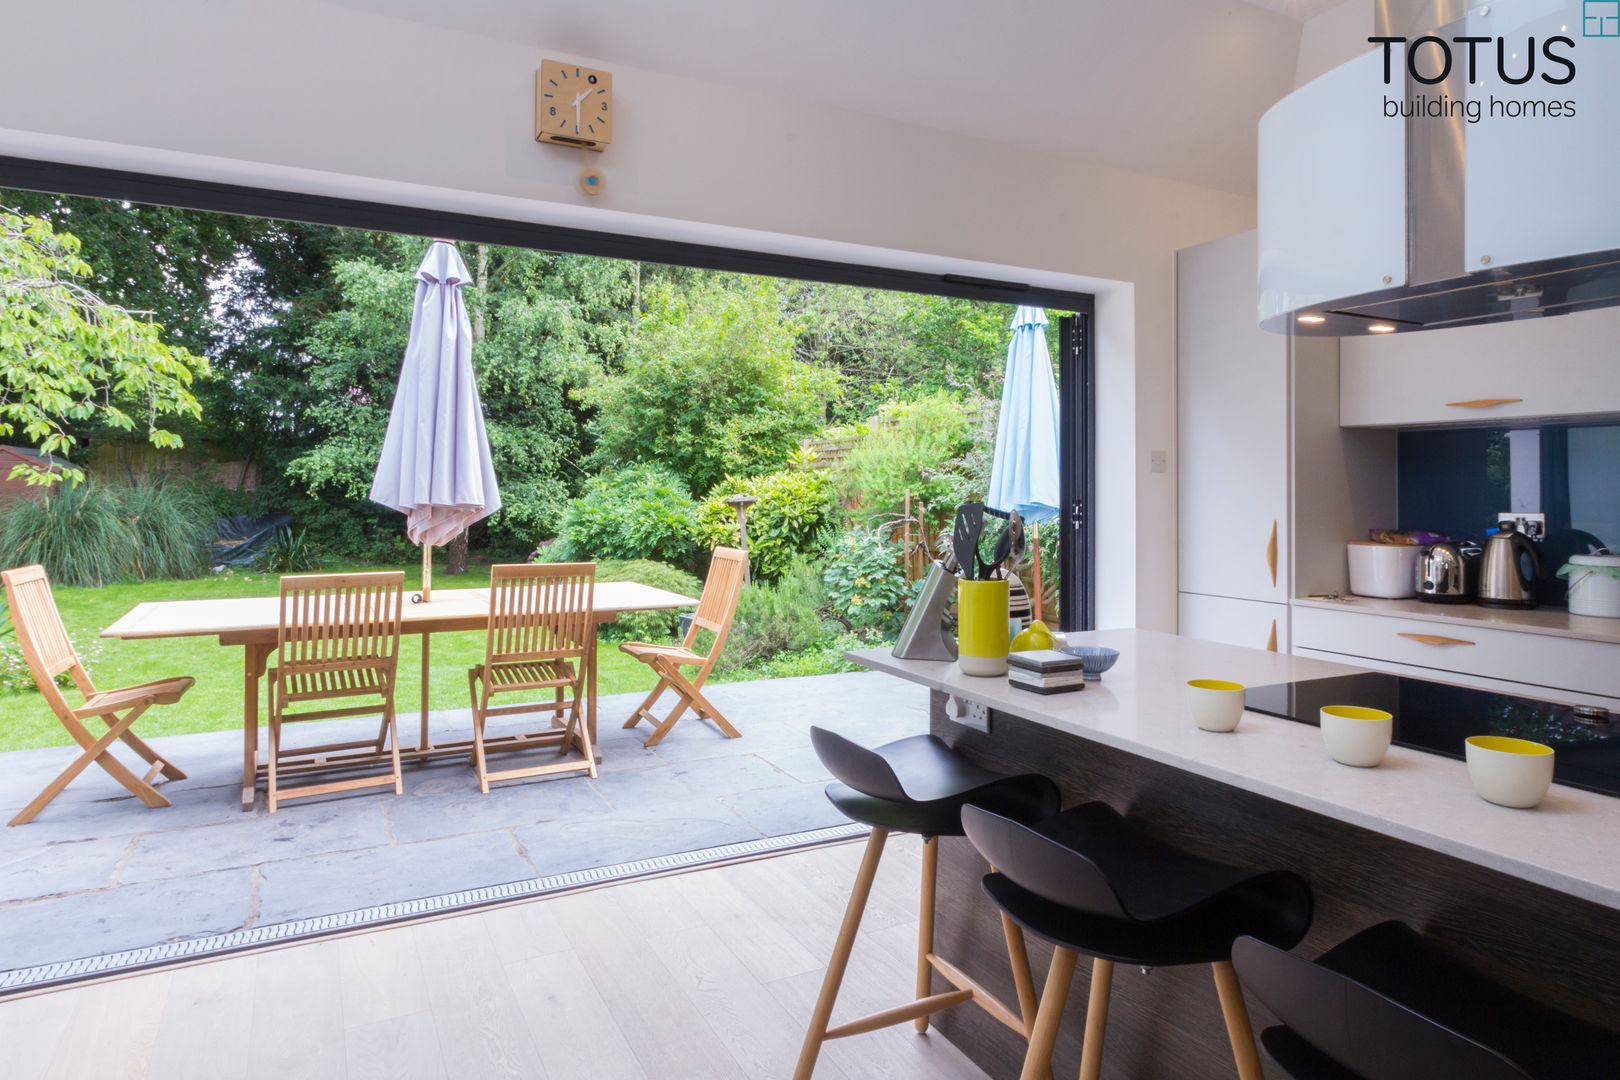 New life for a 1920s home - extension and full renovation, Thames Ditton, Surrey, TOTUS TOTUS Cocinas modernas